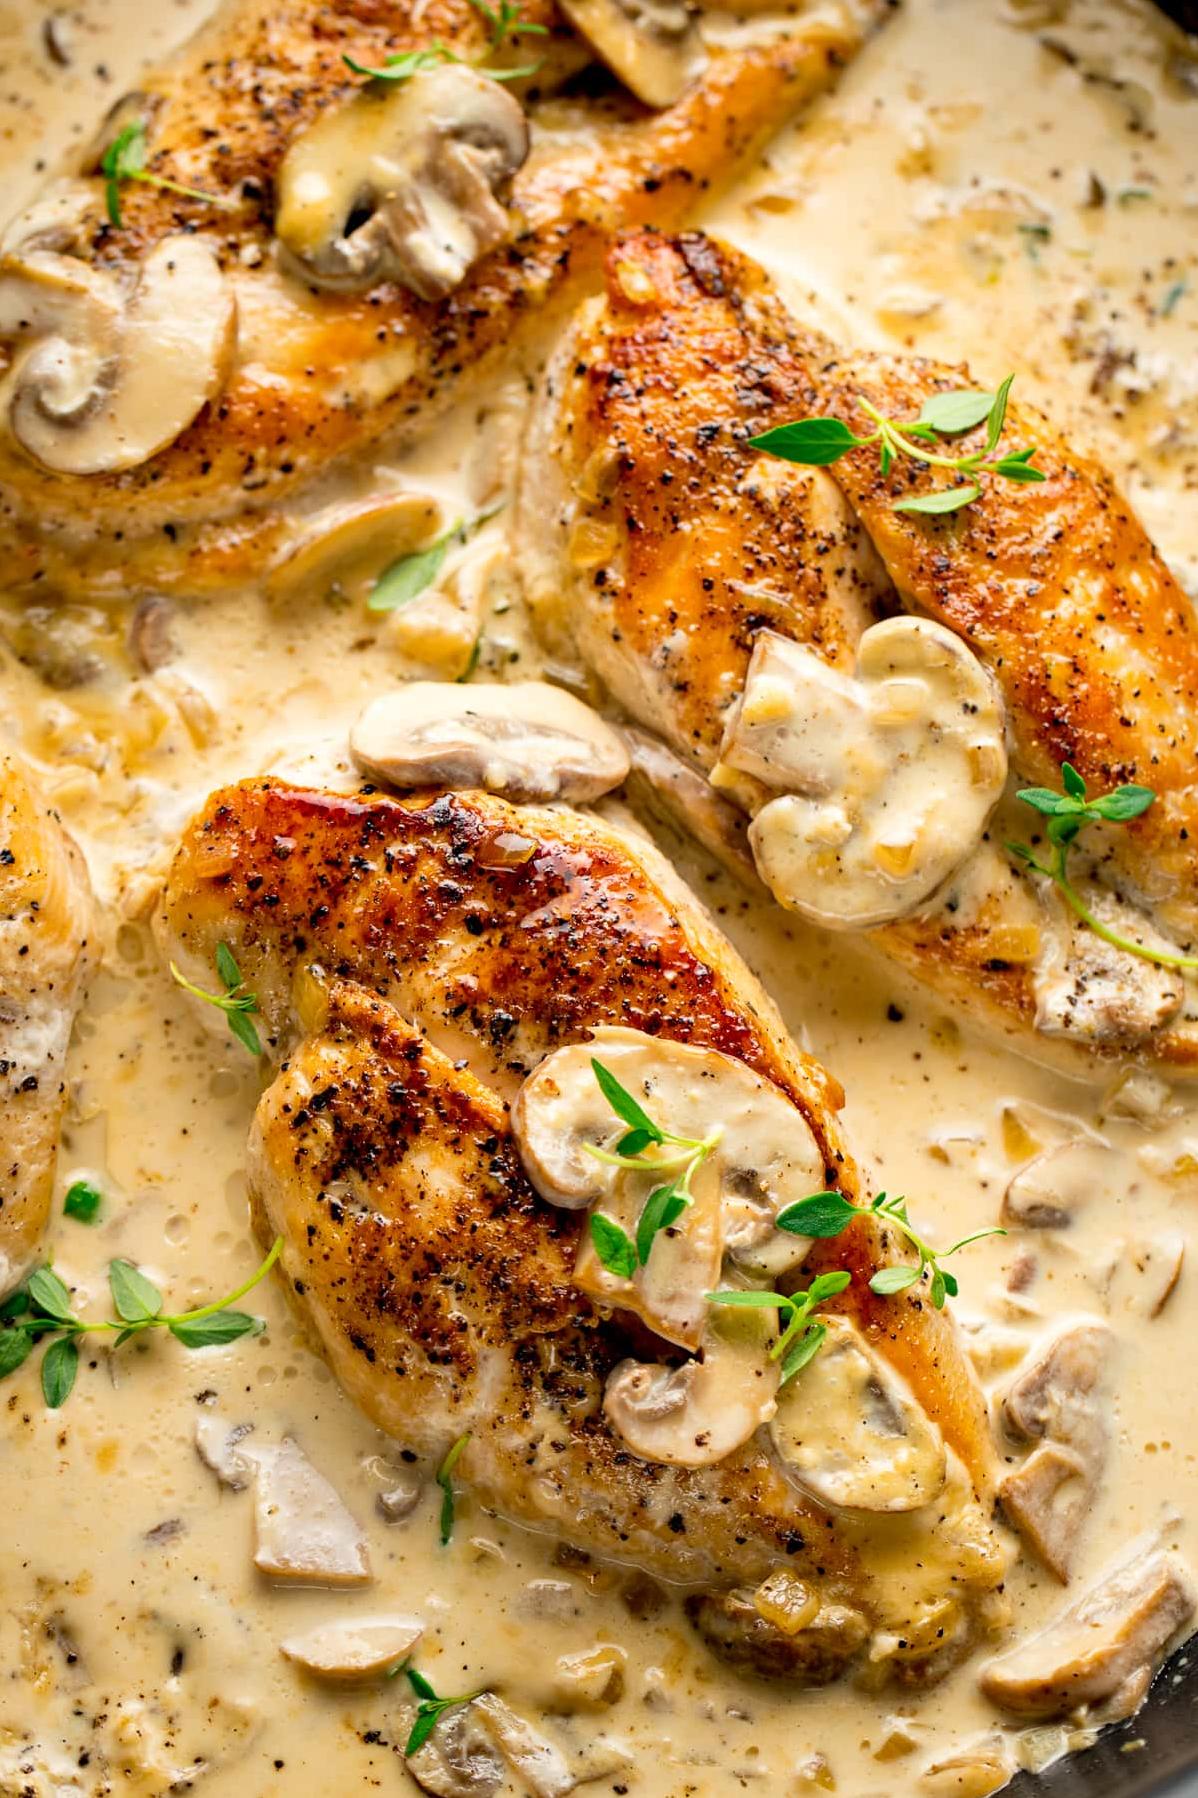  Impress your guests with this easy-to-make roasted chicken dish.